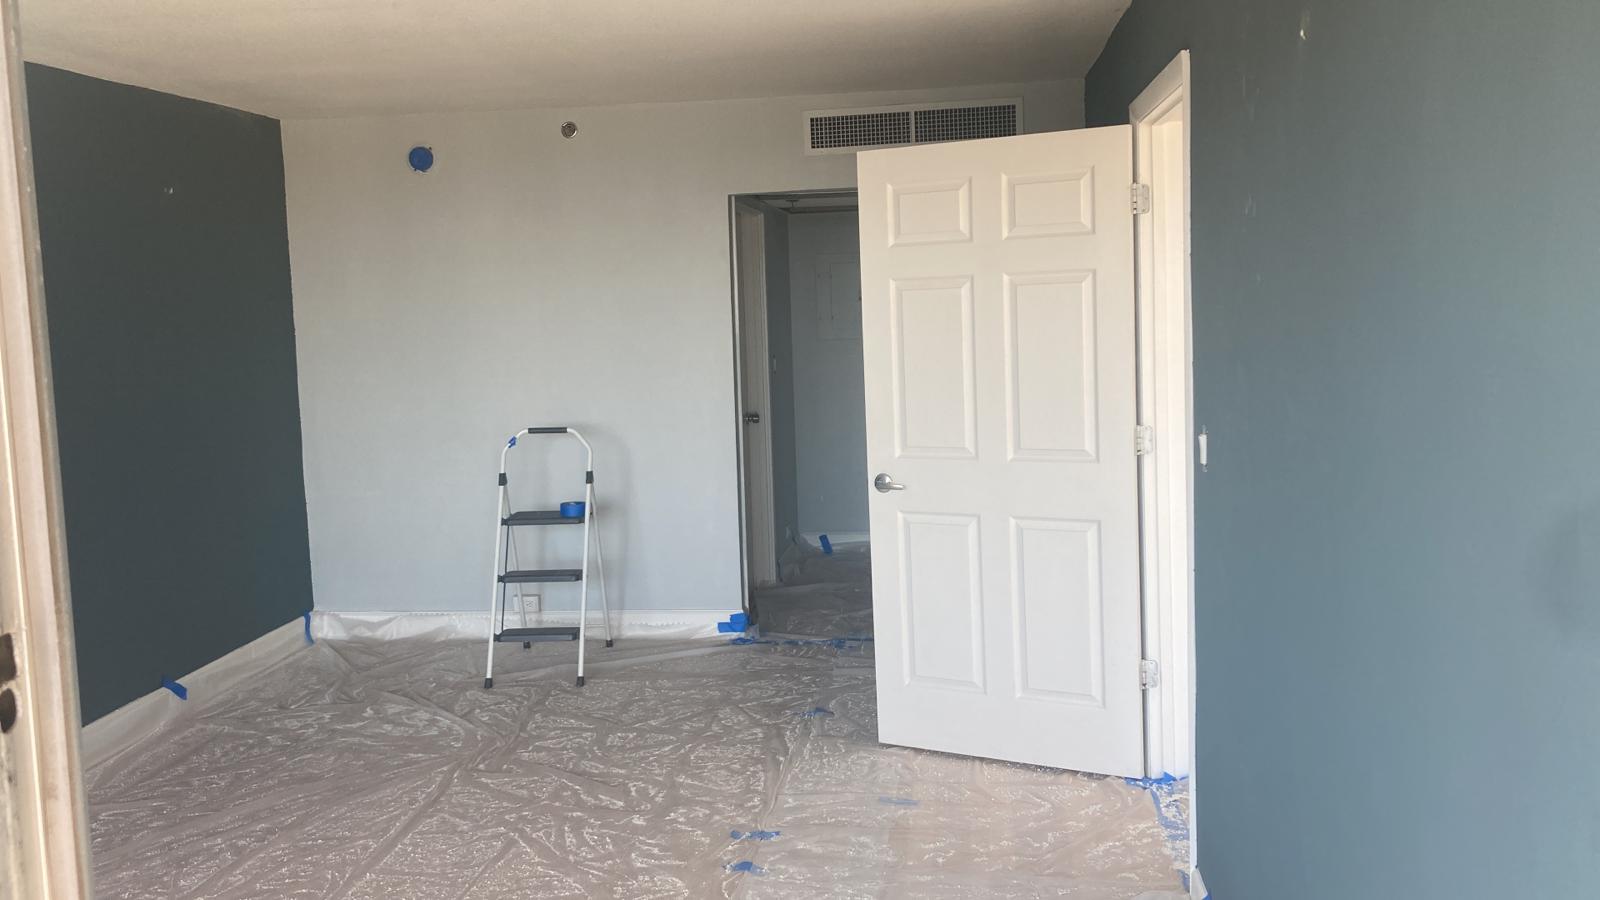 Popcorn Ceiling Removal and Painting in Orlando, FL